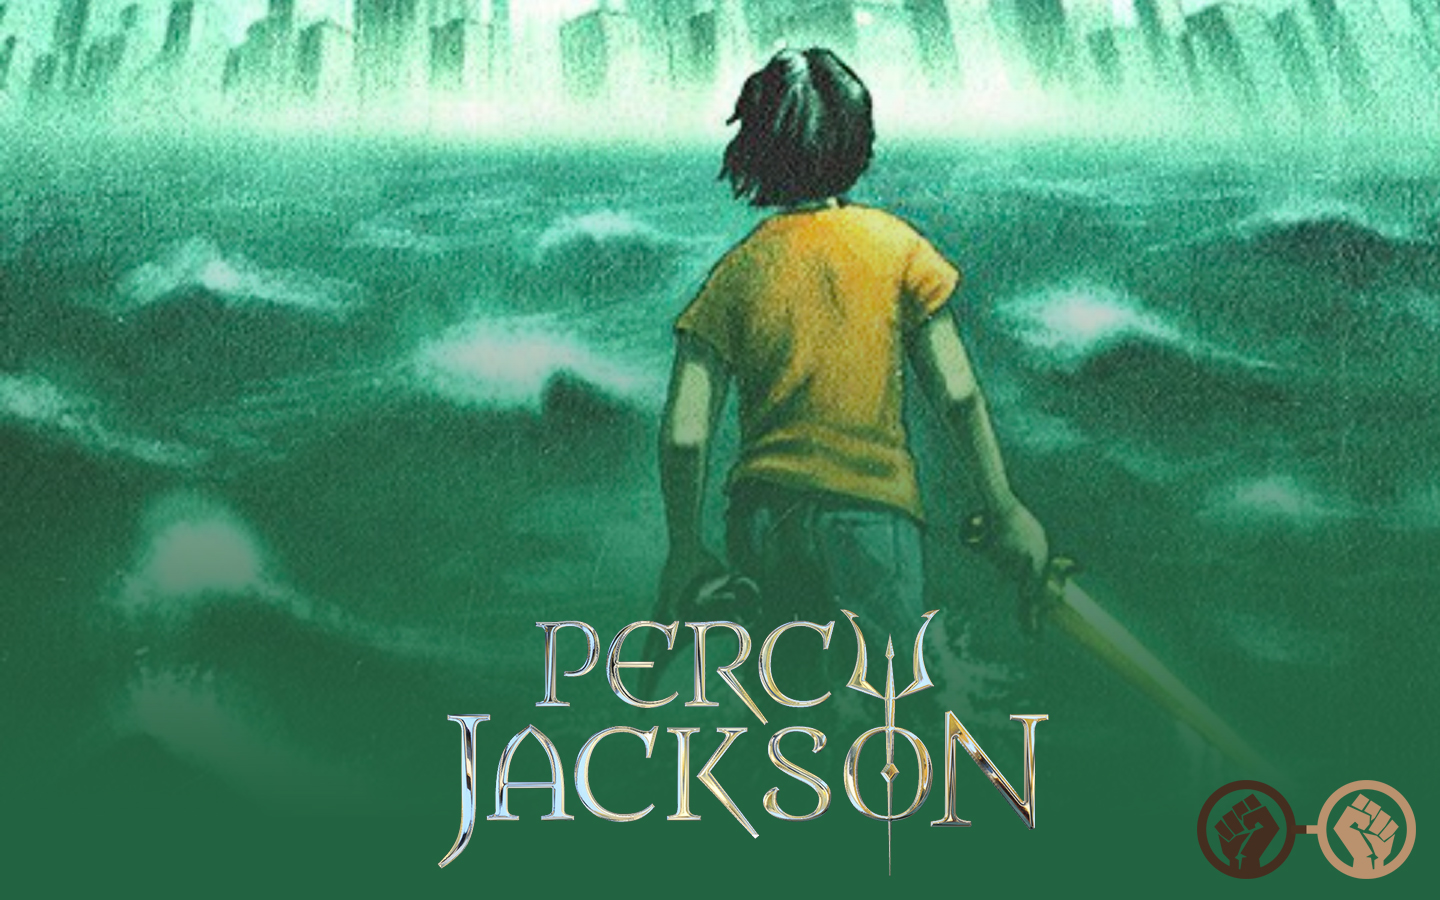 Fancast Friday: Who We Would Like to See in Disney+’s Live-Action ‘Percy Jackson’ Series